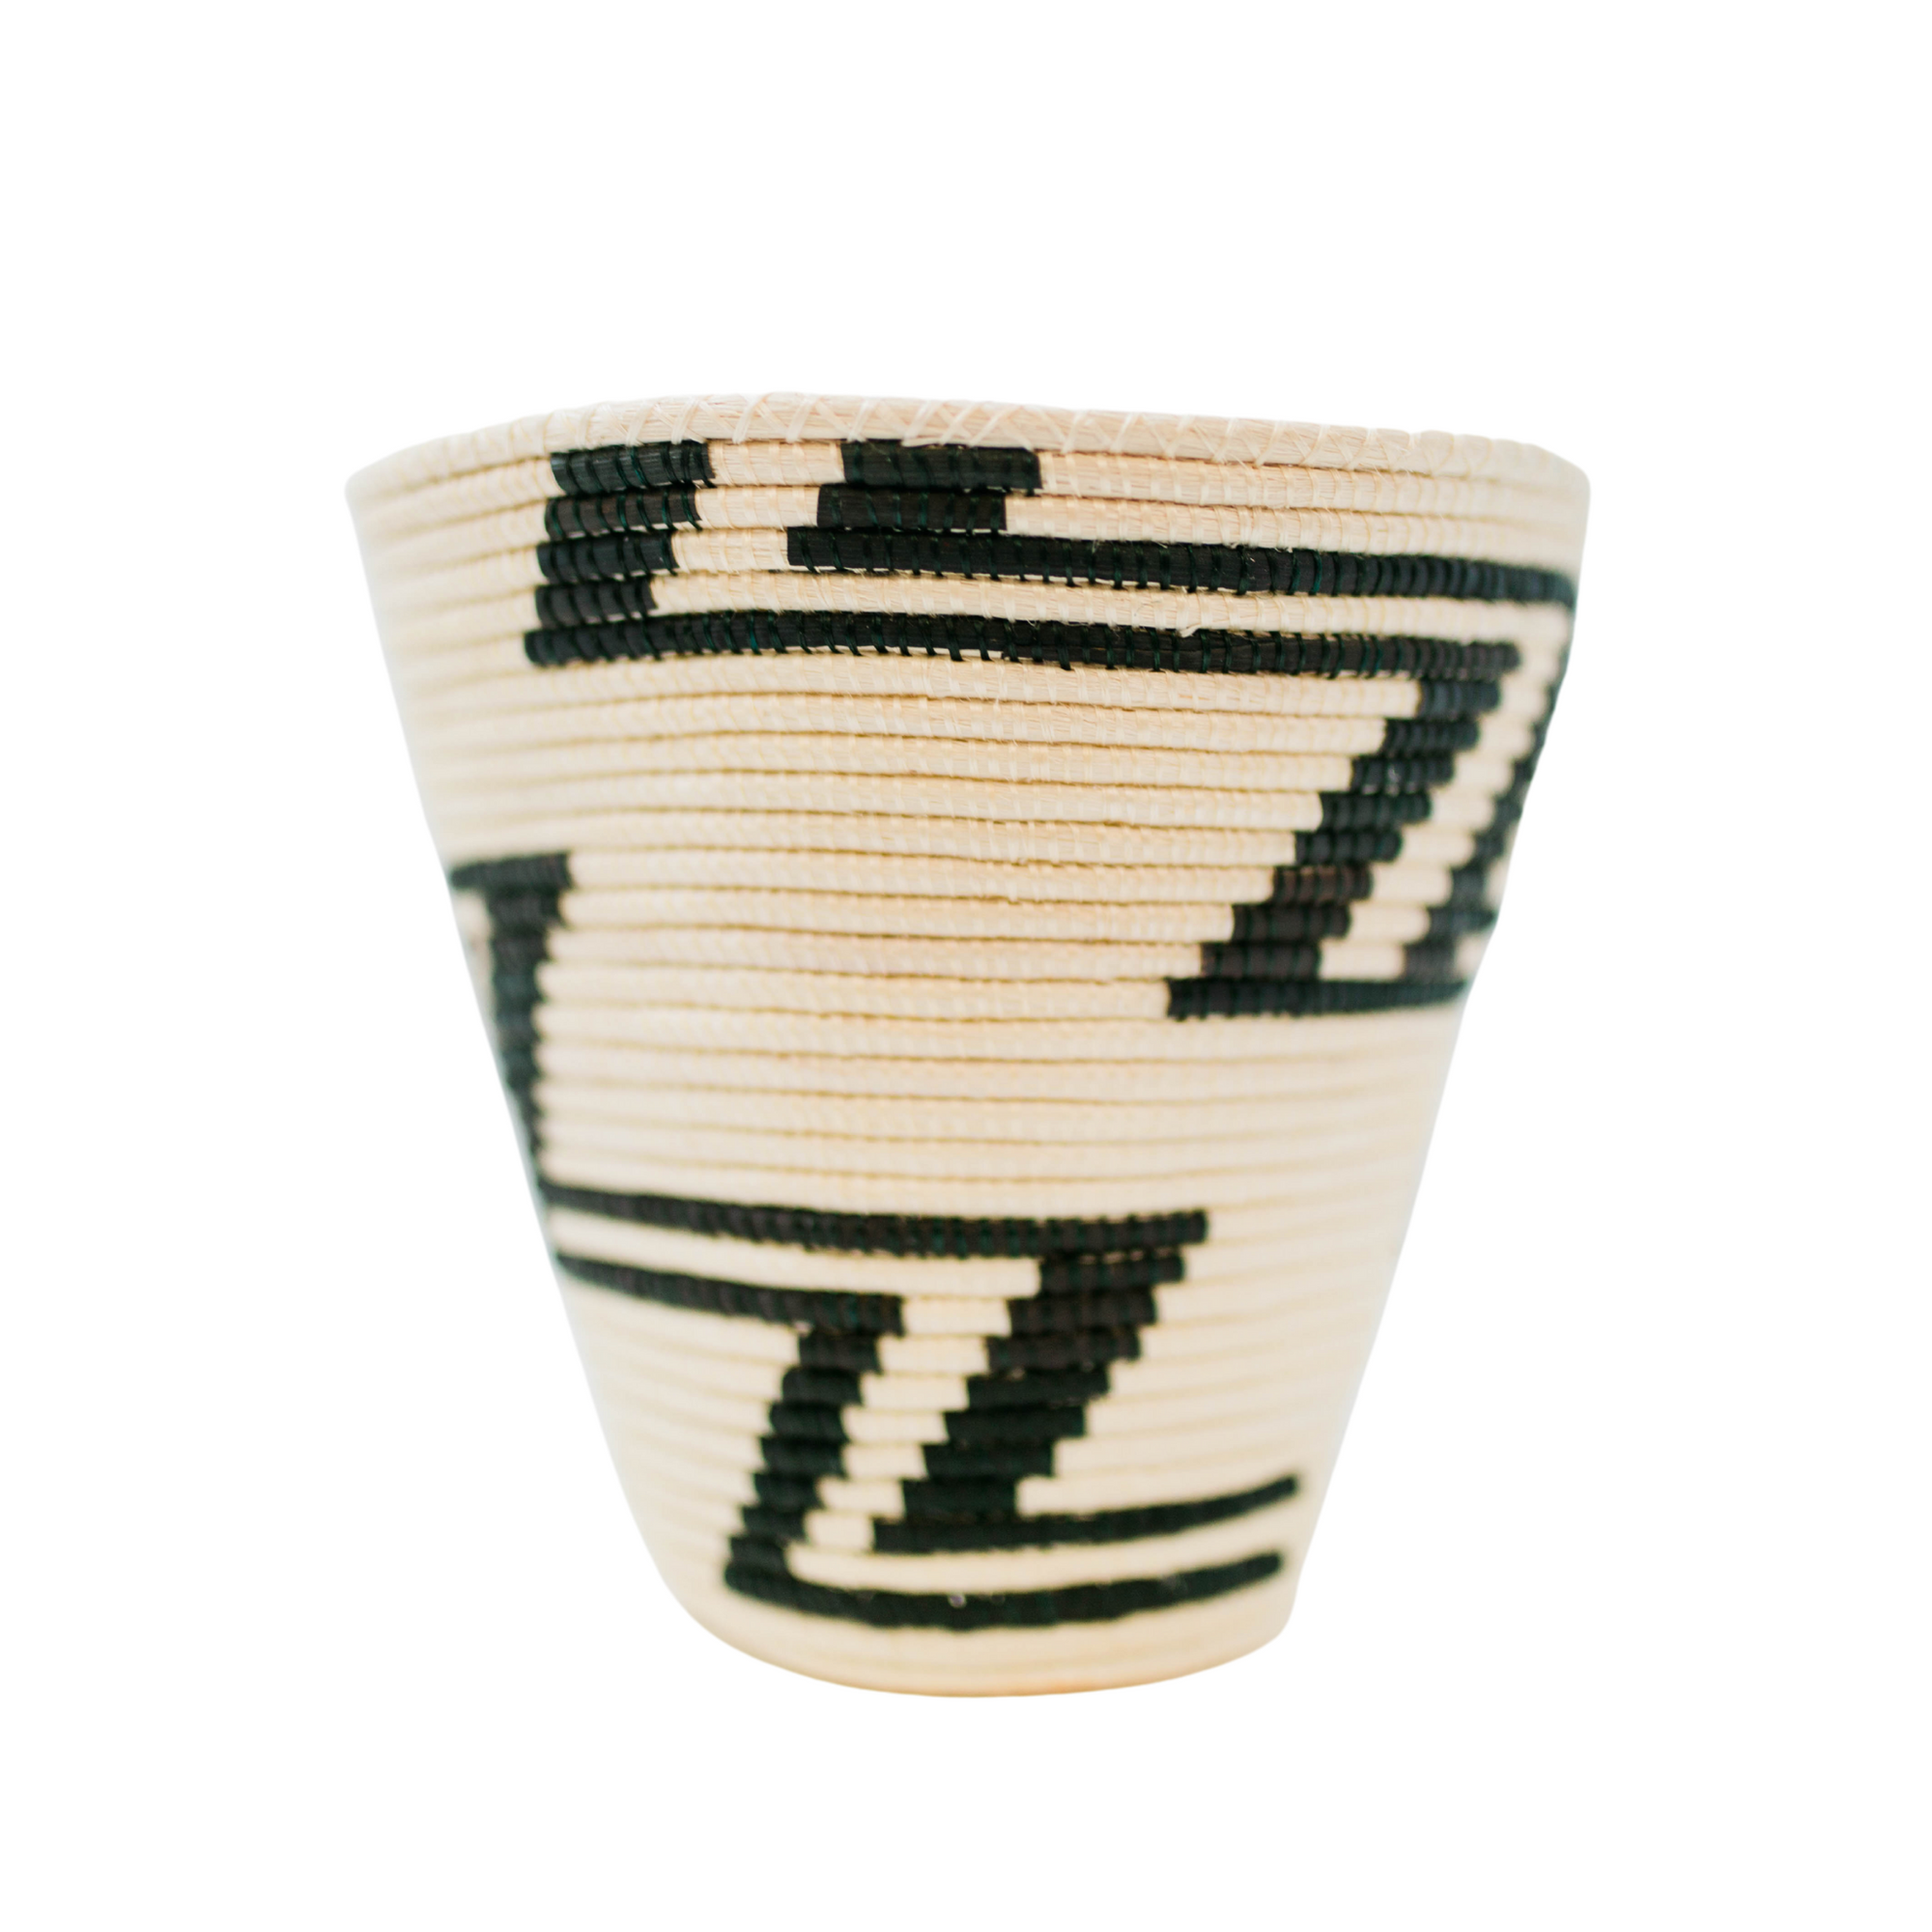 Handwoven Baskets with Lids